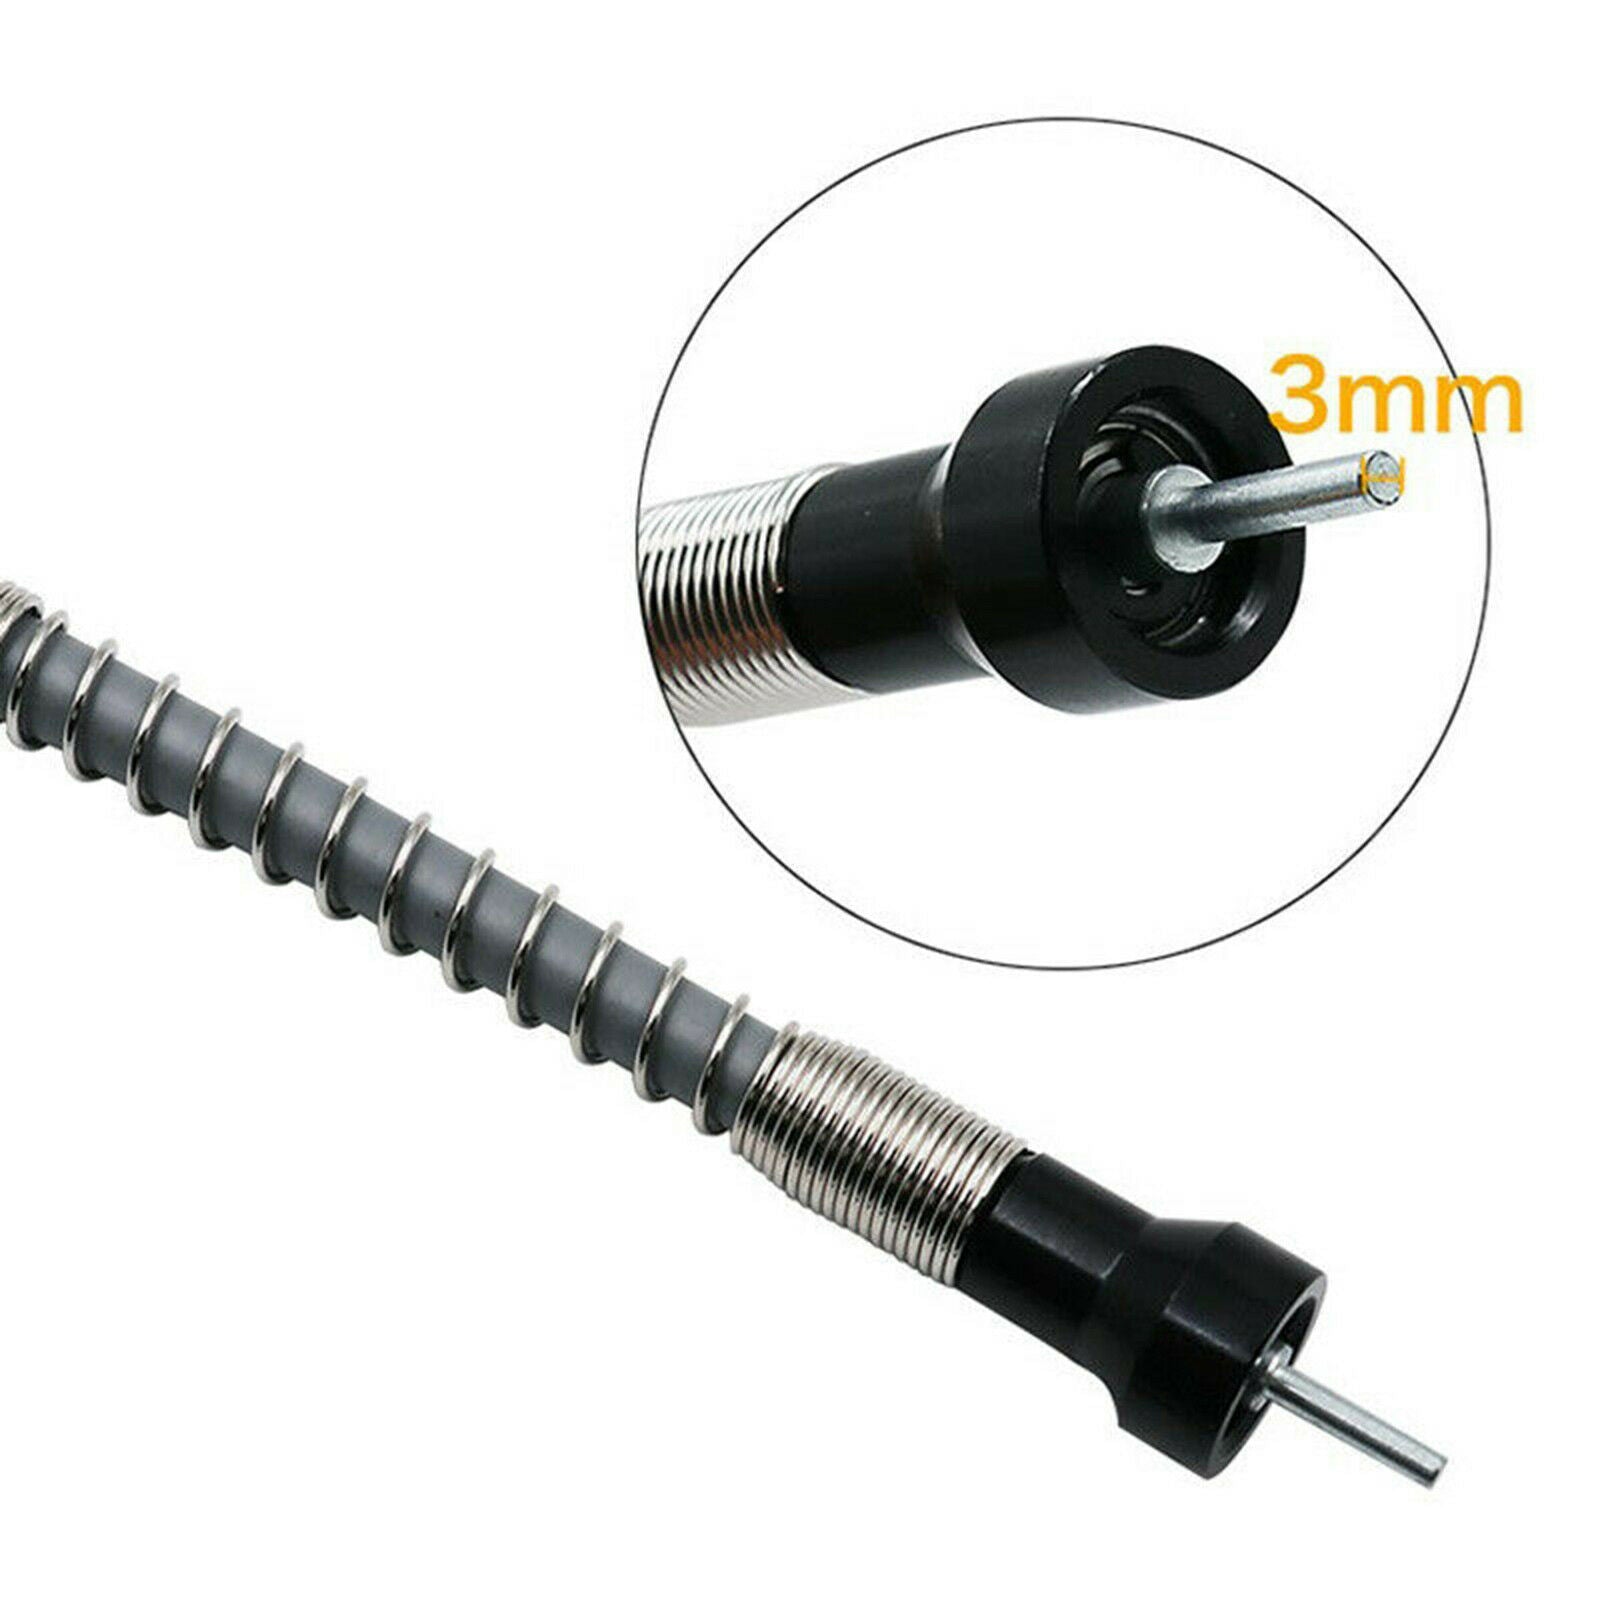 1/8 inch 3.175mm Flex Shaft Adapter Flexible Power Drill Extension Cable for